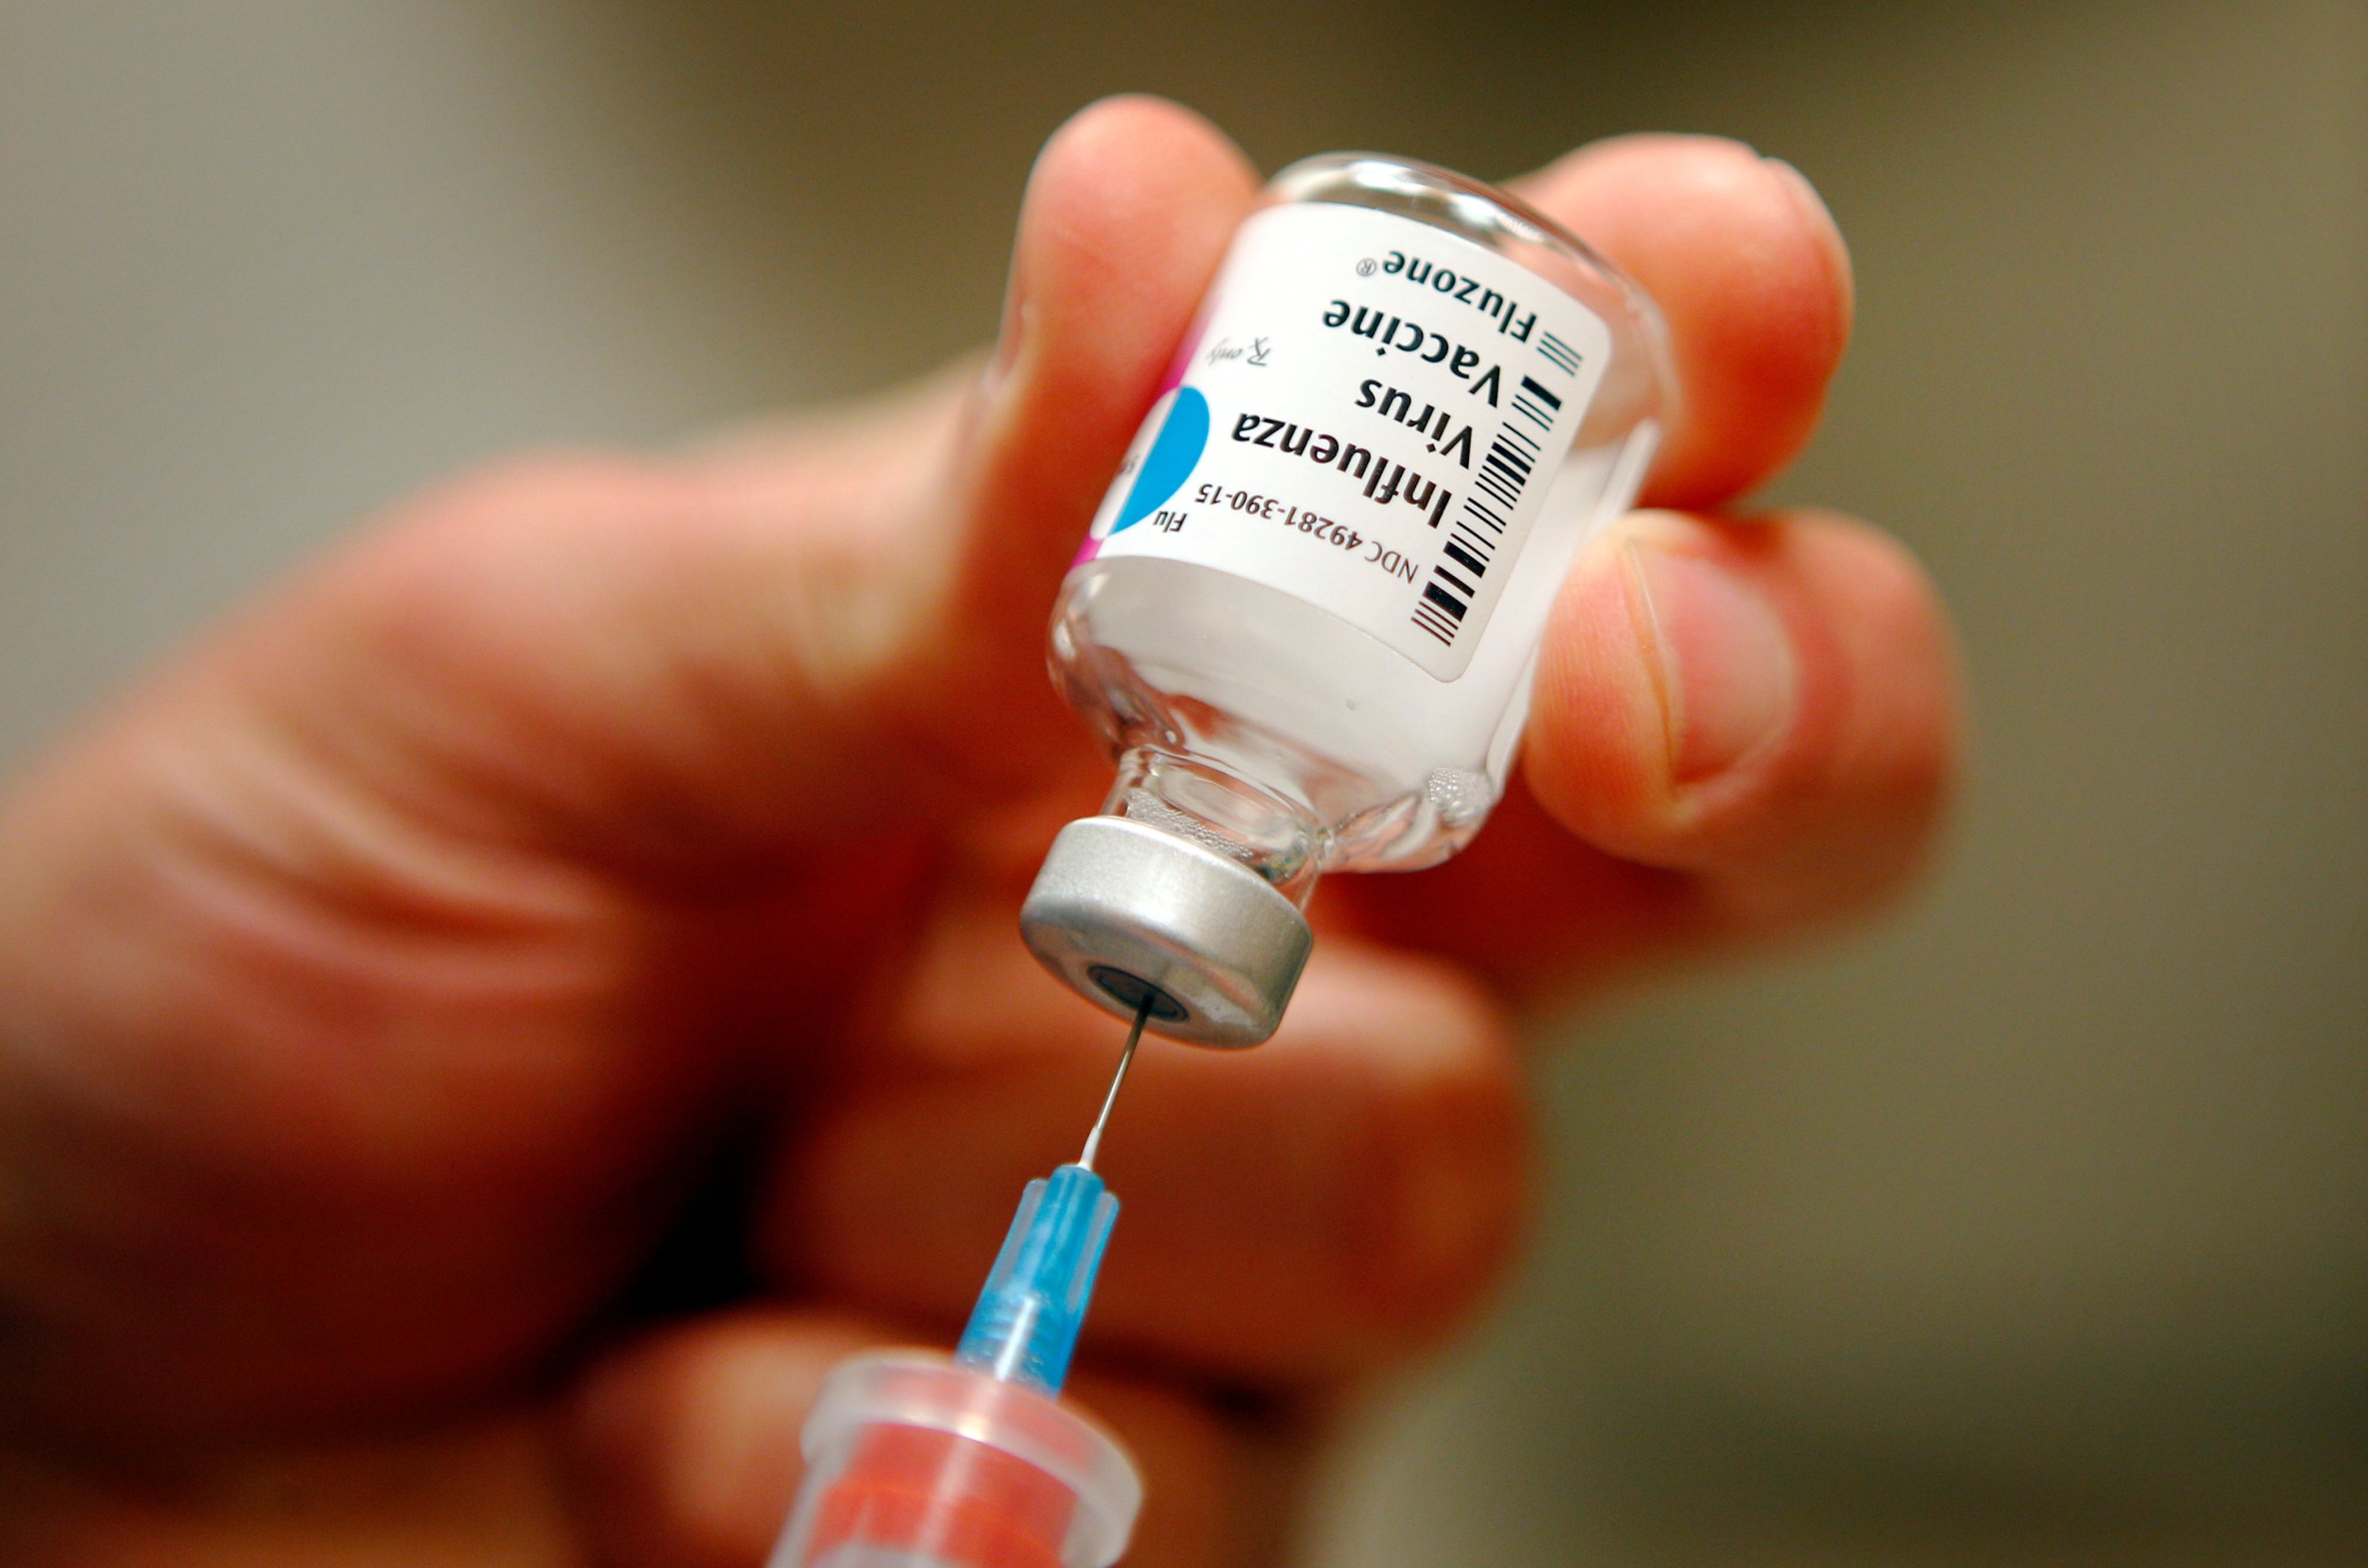 A nurse prepares an injection of the influenza vaccine at Massachusetts General Hospital in Boston, Massachusetts January 10, 2013. (REUTERS Photo)